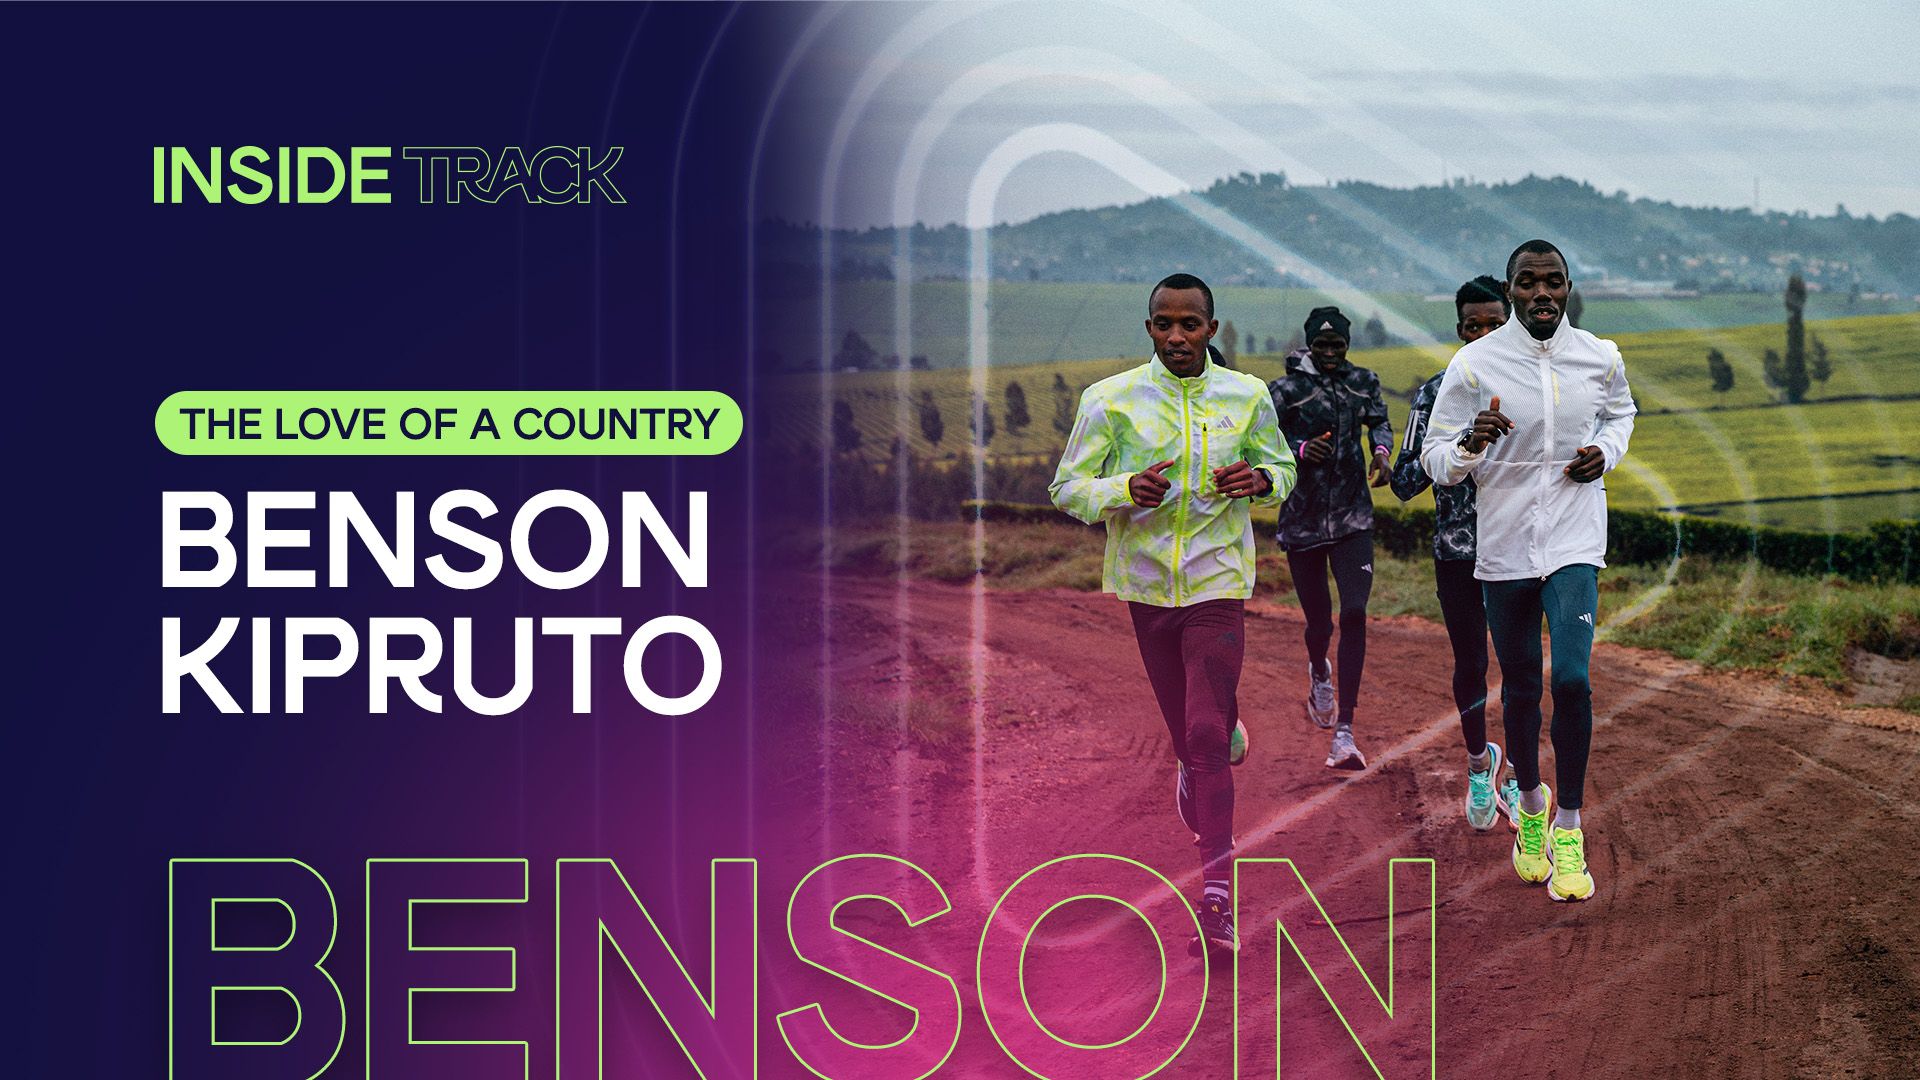 Benson Kipruto: the love of a country